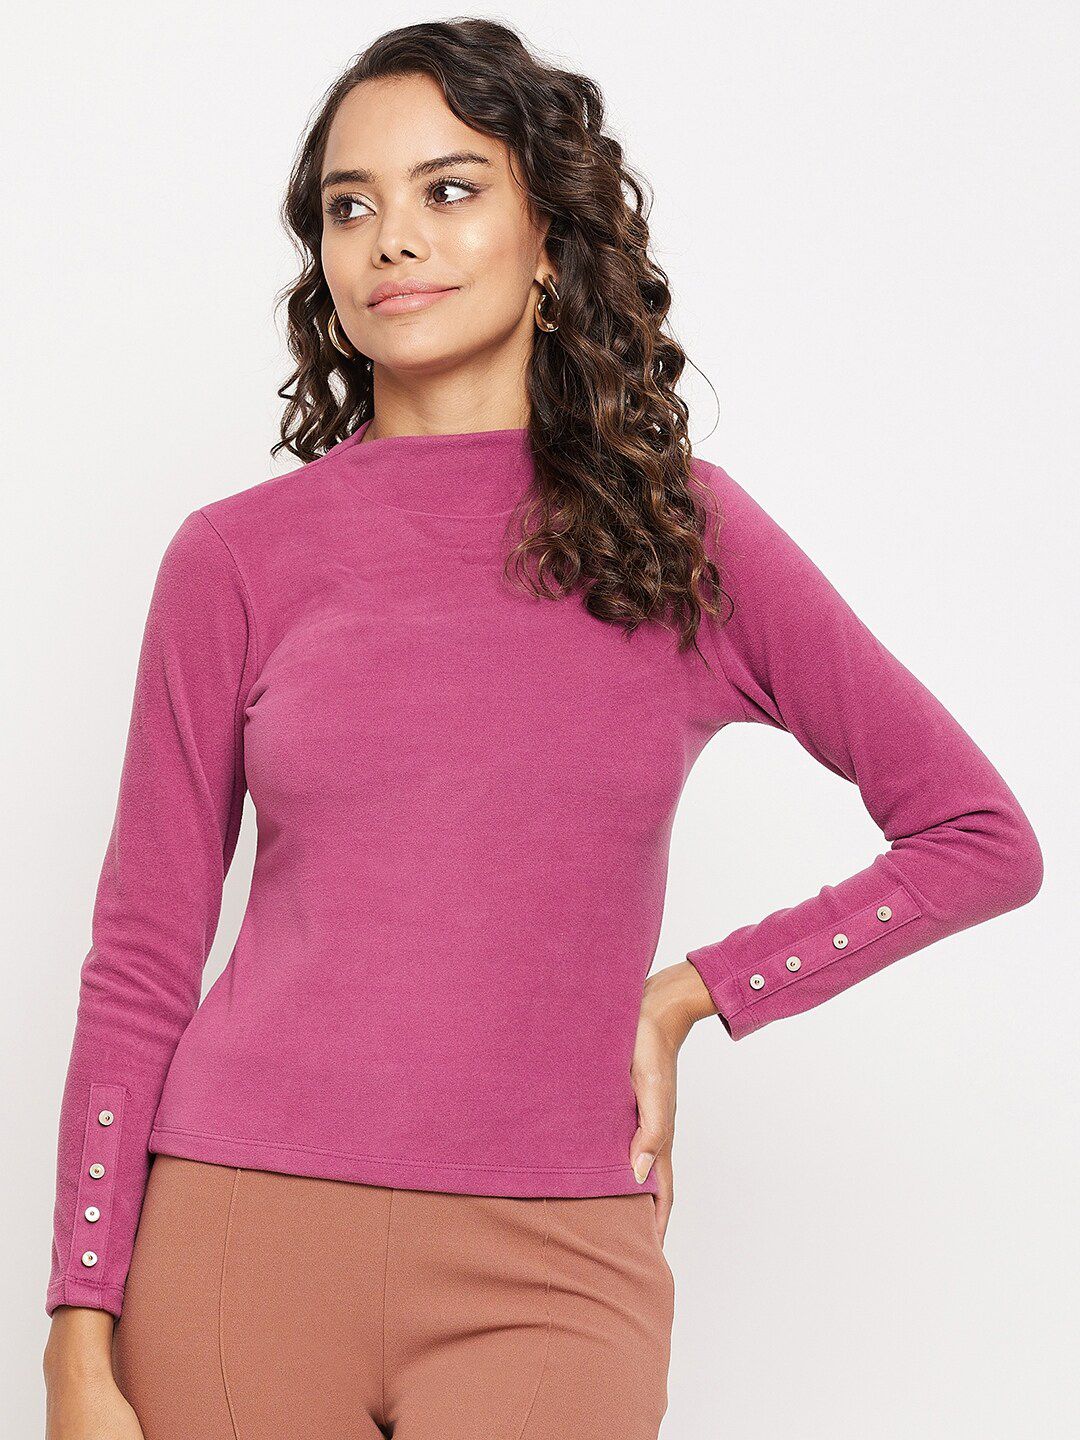 Madame Pink Top Price in India